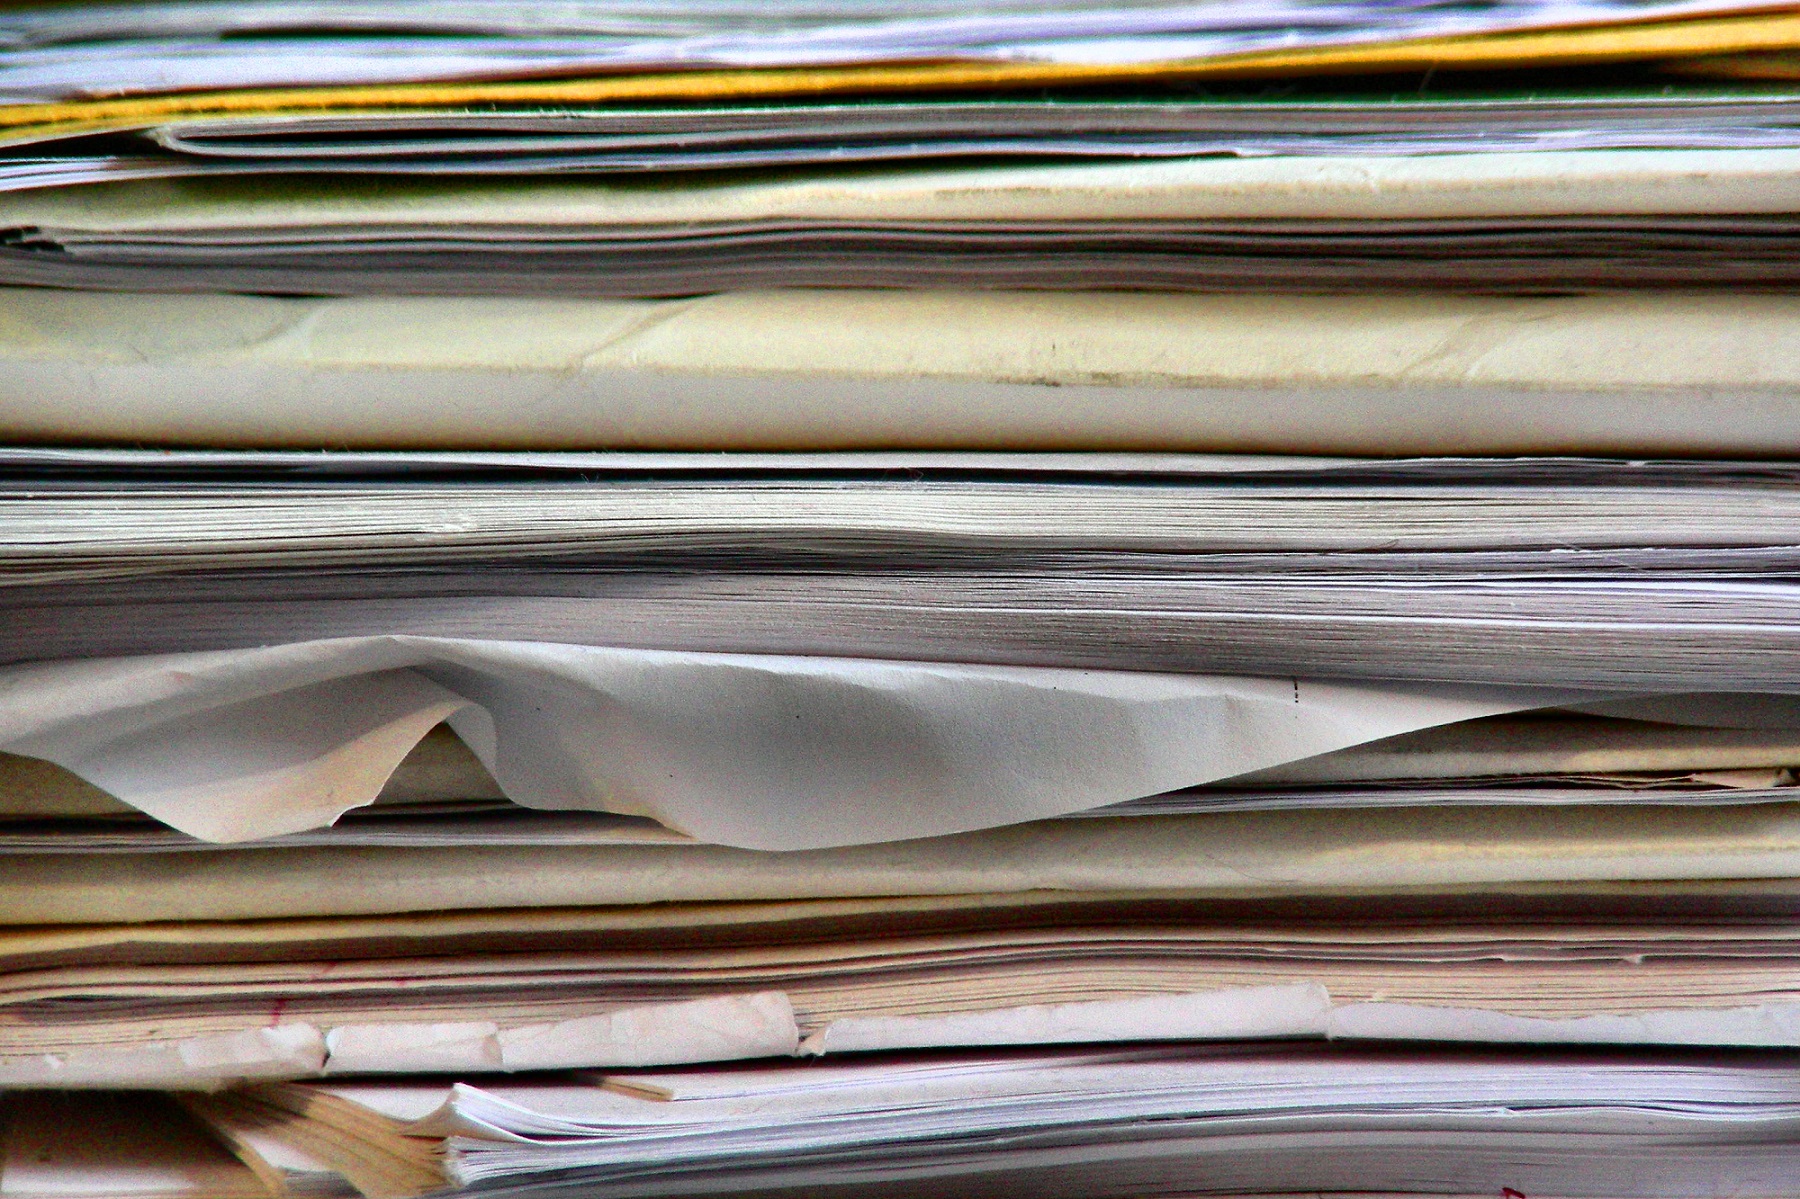 Despite technological advances, paper isn’t going anywhere